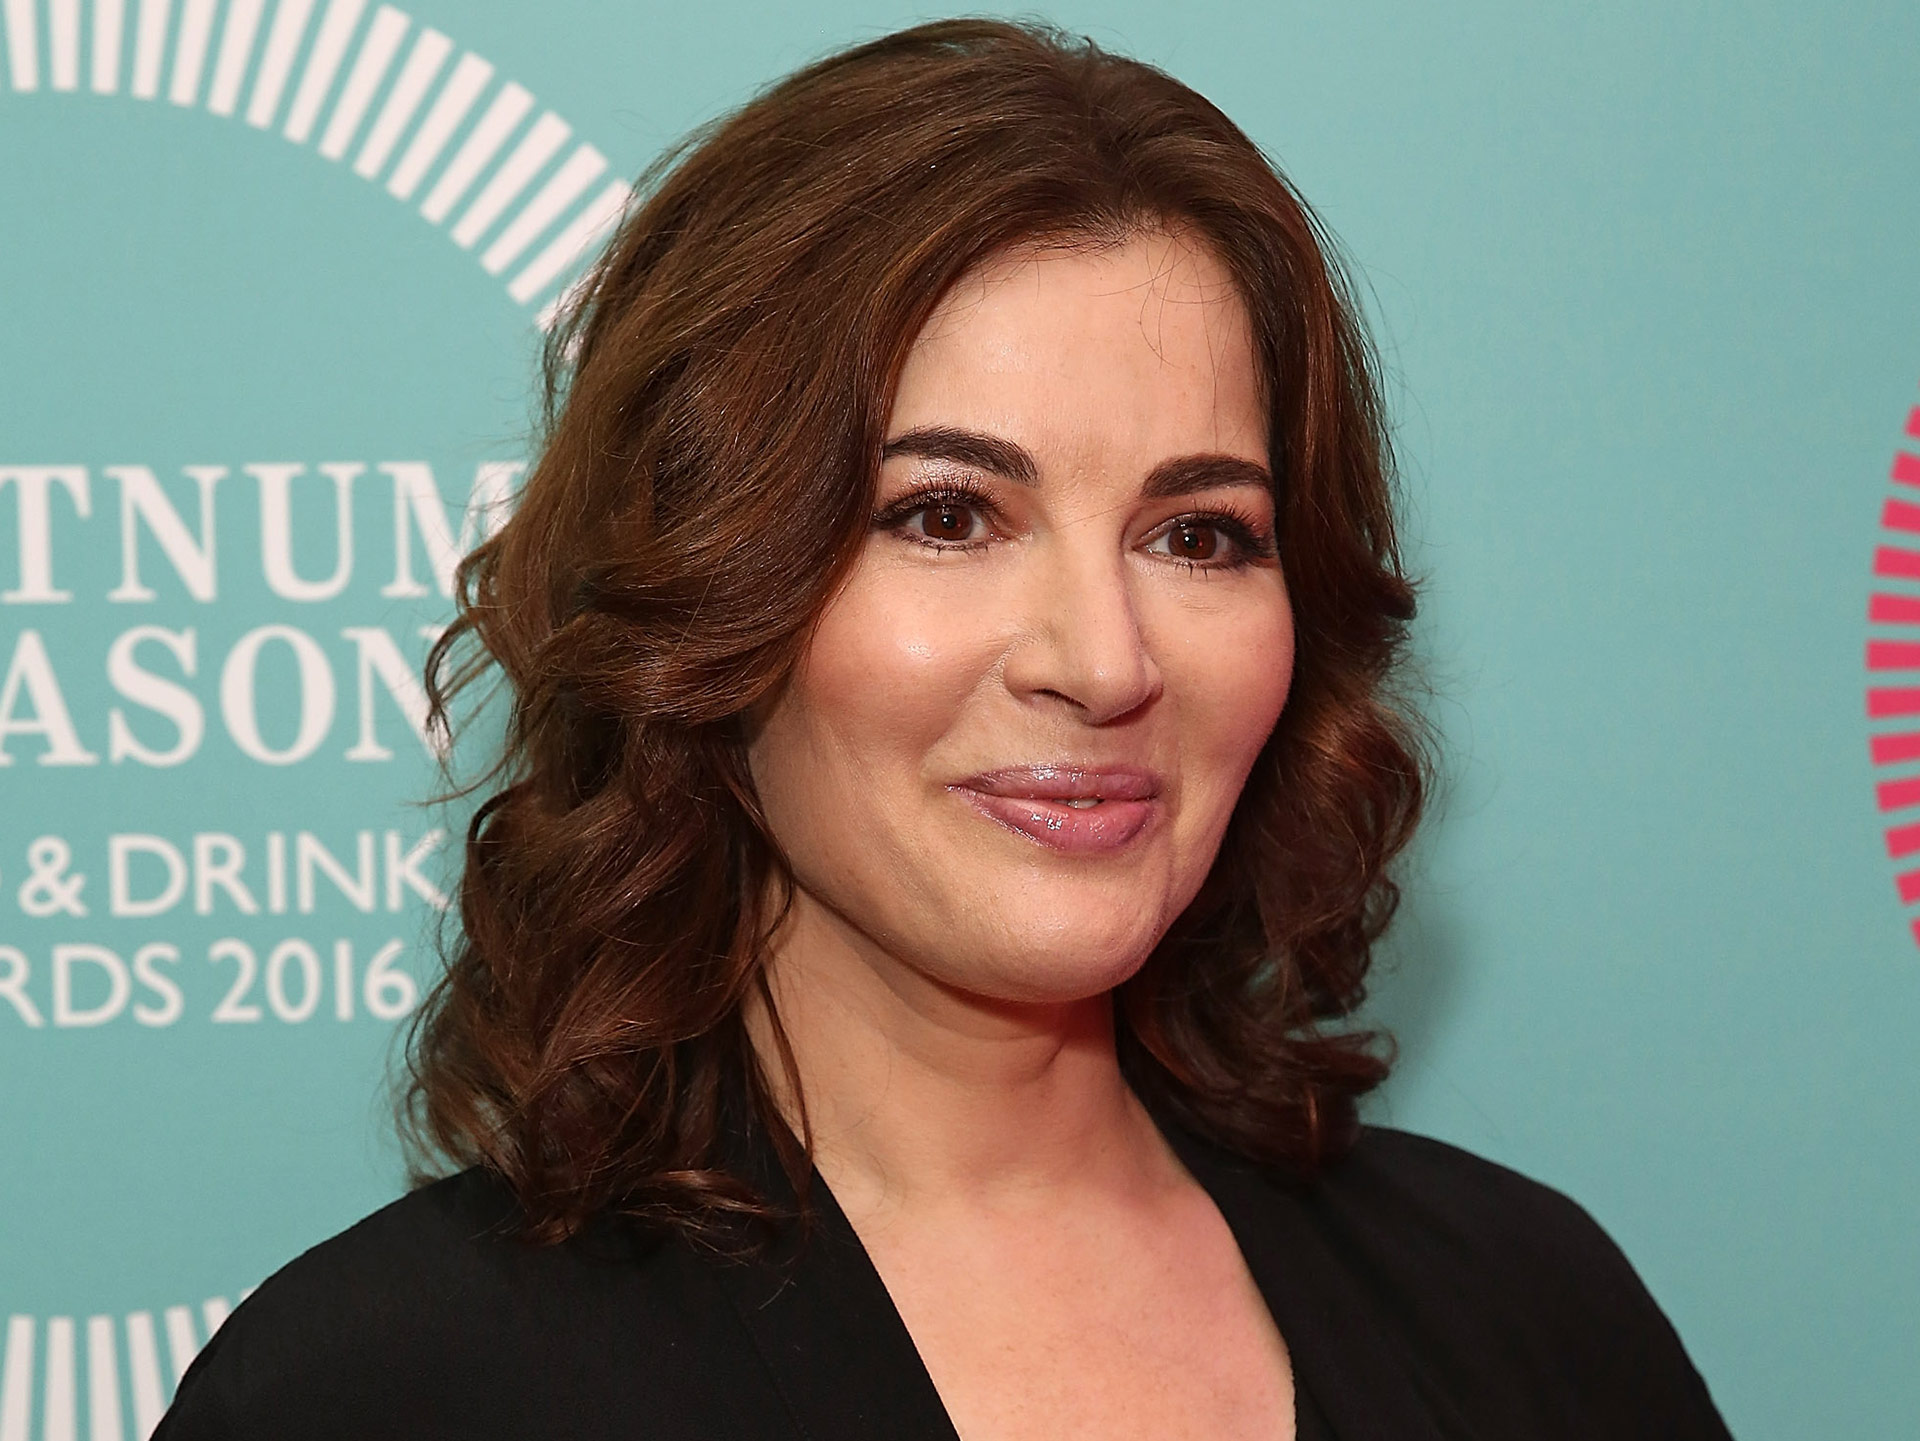 WATCH: These hilarious Nigella Lawson bloopers are everything you need to see today